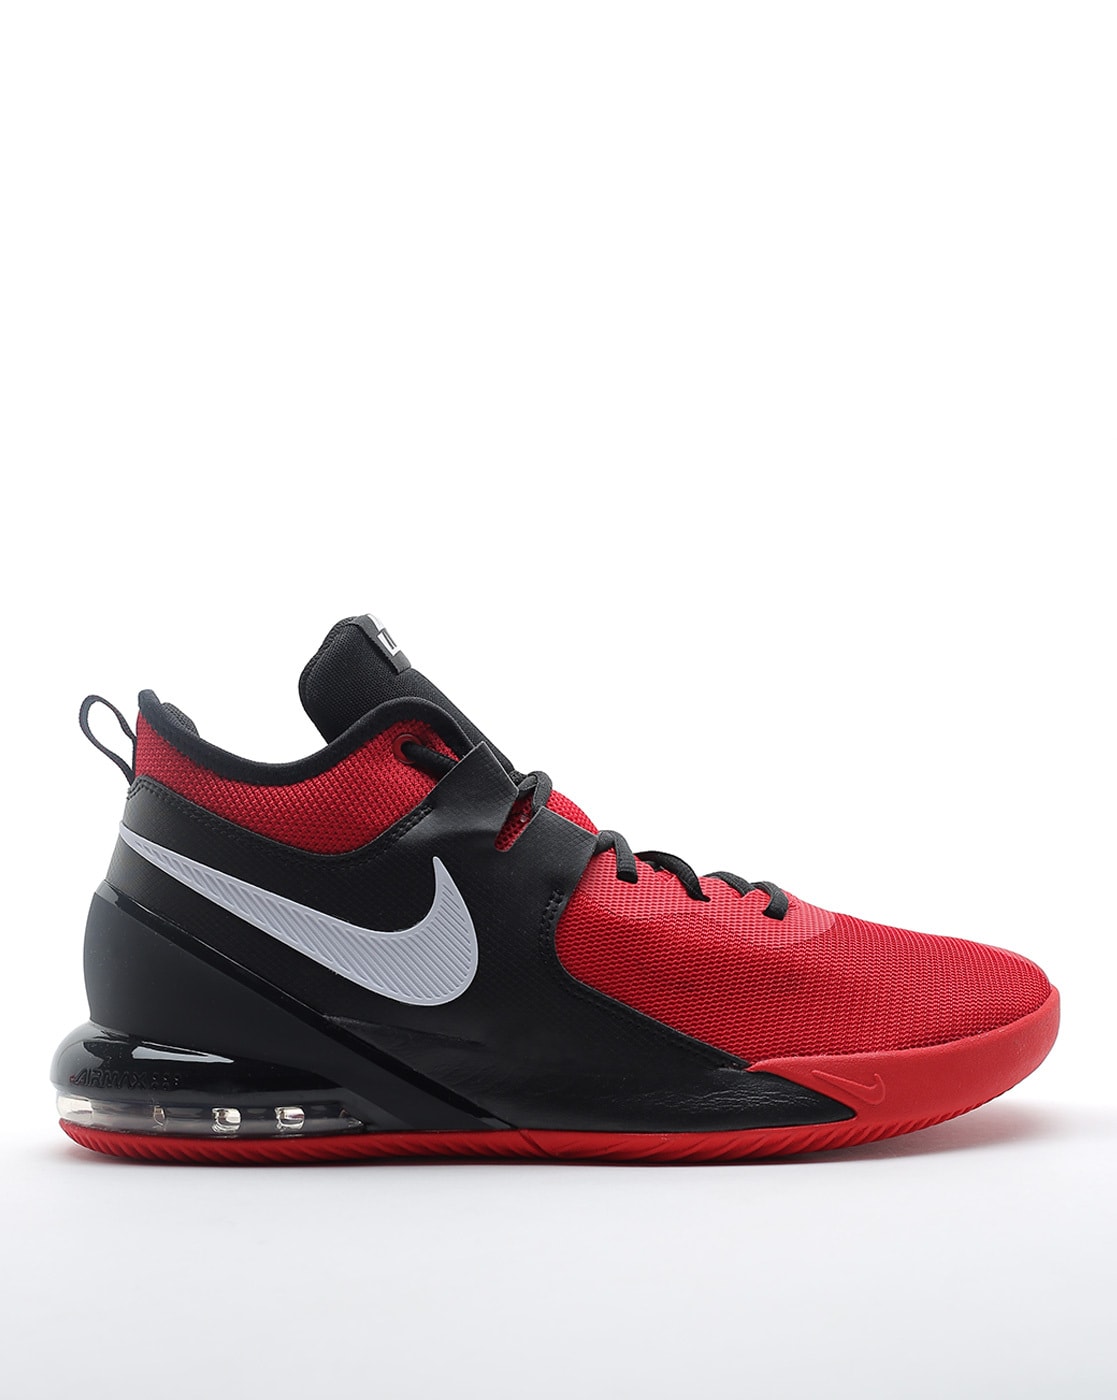 basketball shoes nike red